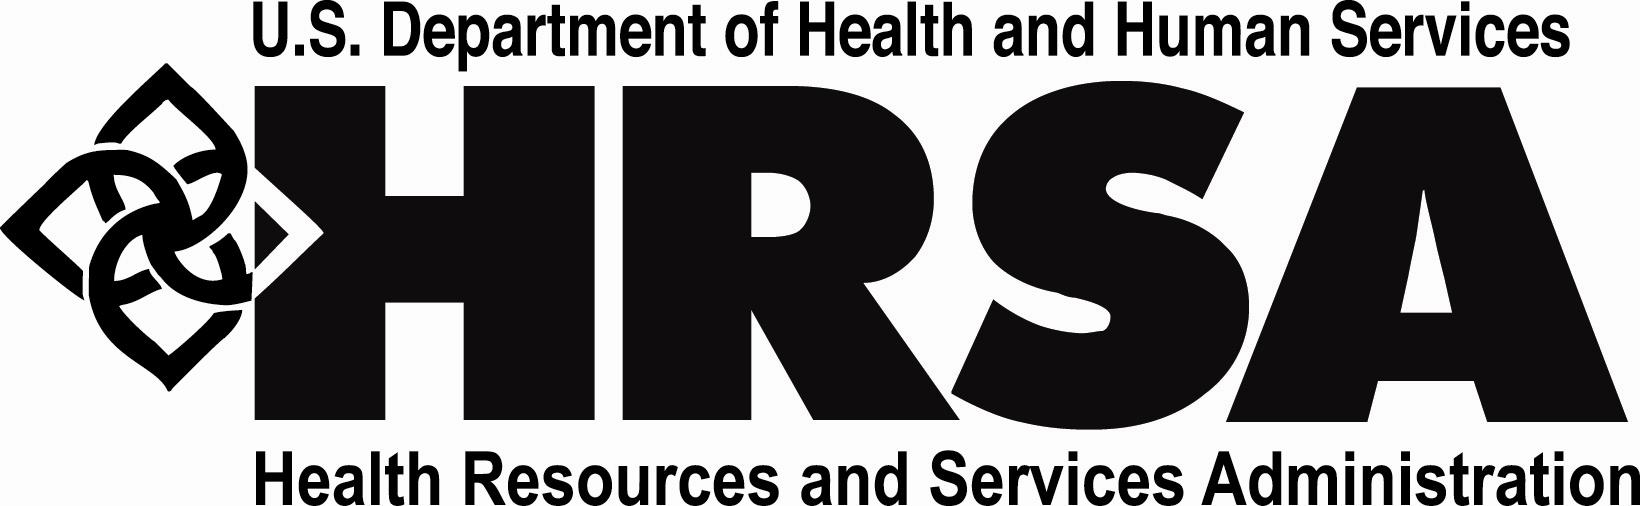 Department of Health and Human Services/Health Resources and Services Administration Logo